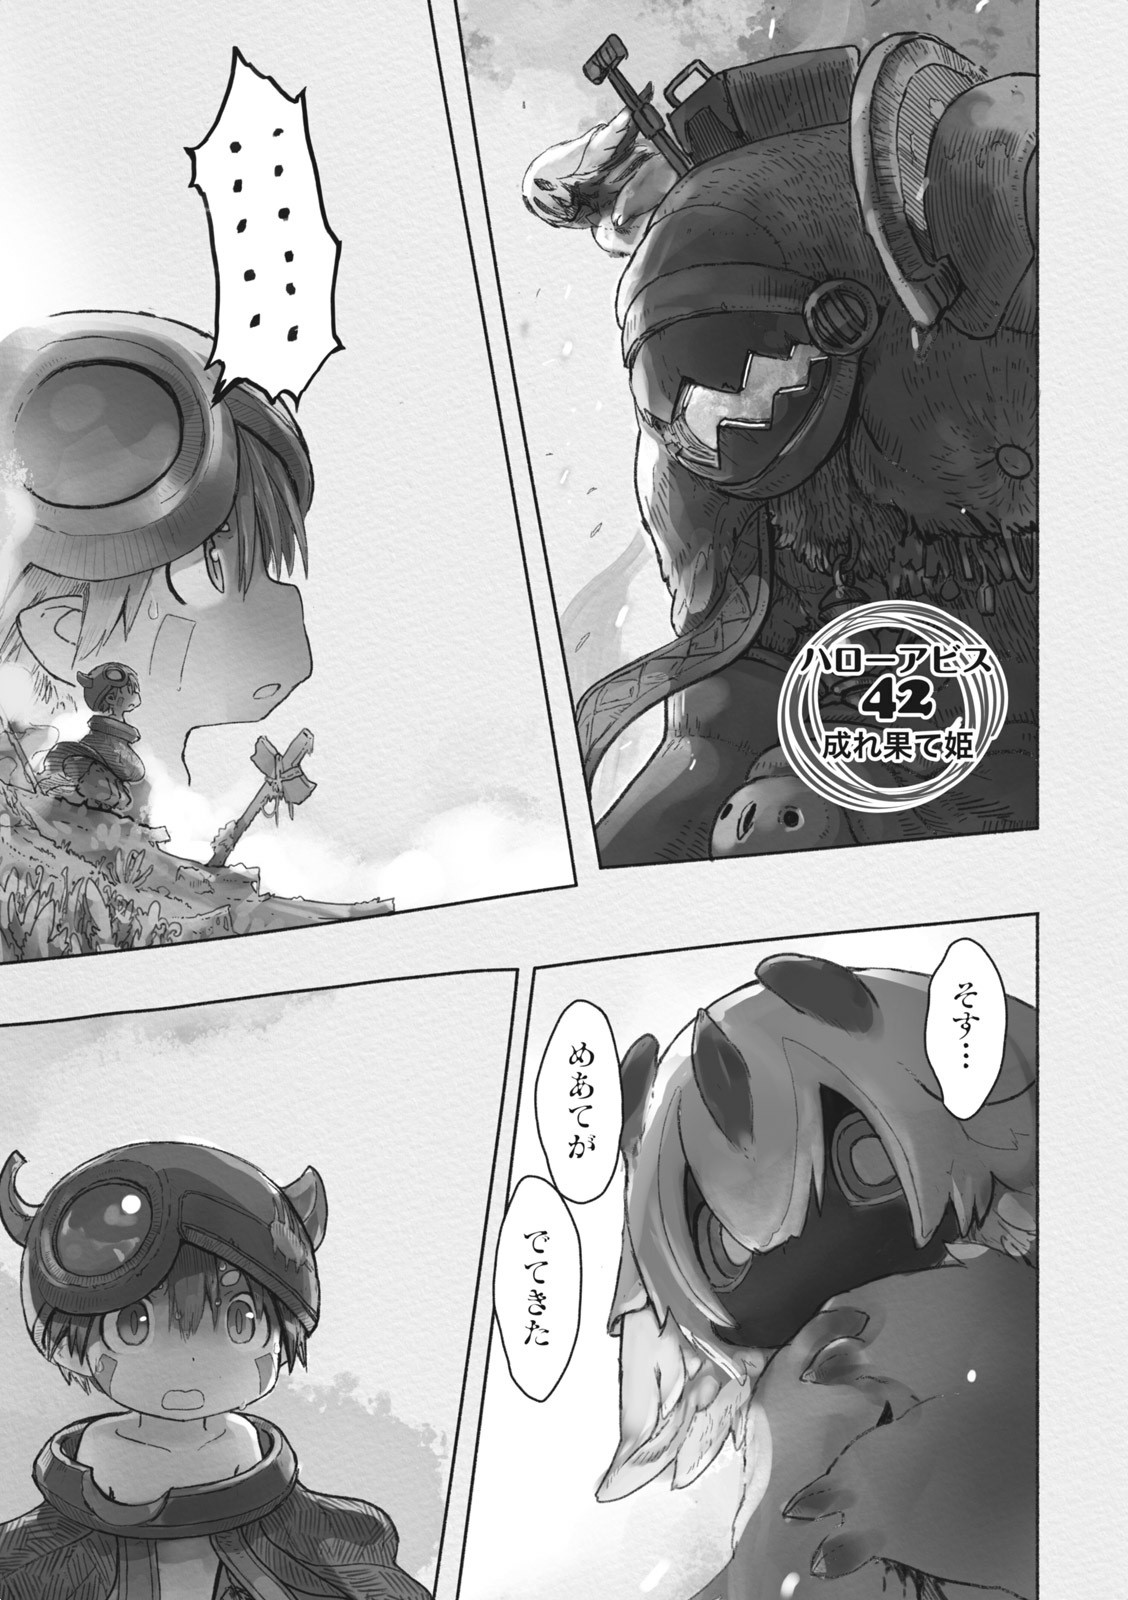 Made in Abyss Chapter 061, Made in Abyss Wiki